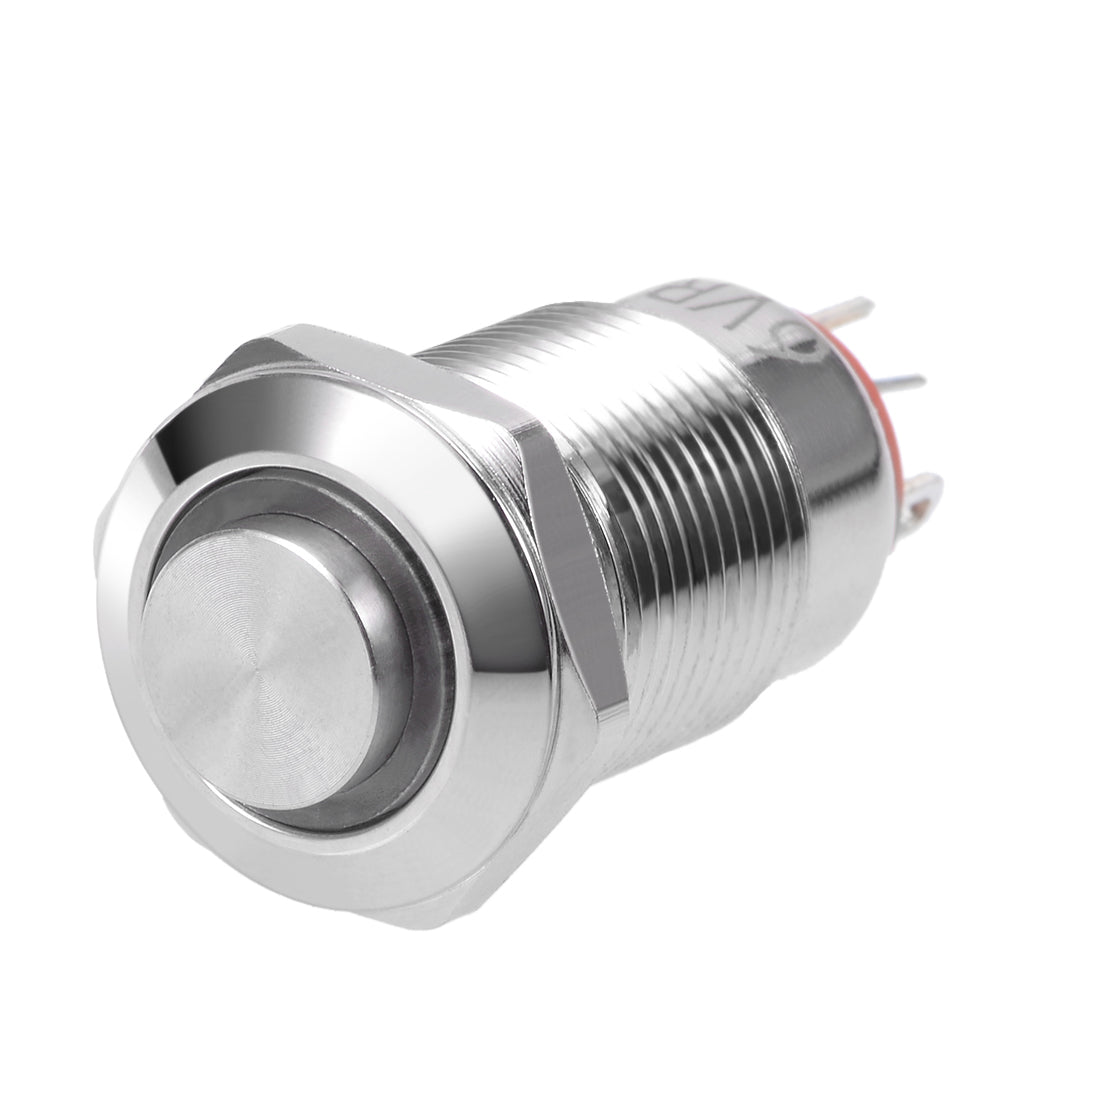 uxcell Uxcell Latching Metal Push Button Switch 12mm Mounting Dia 1NO 6V Red LED Light High Flat